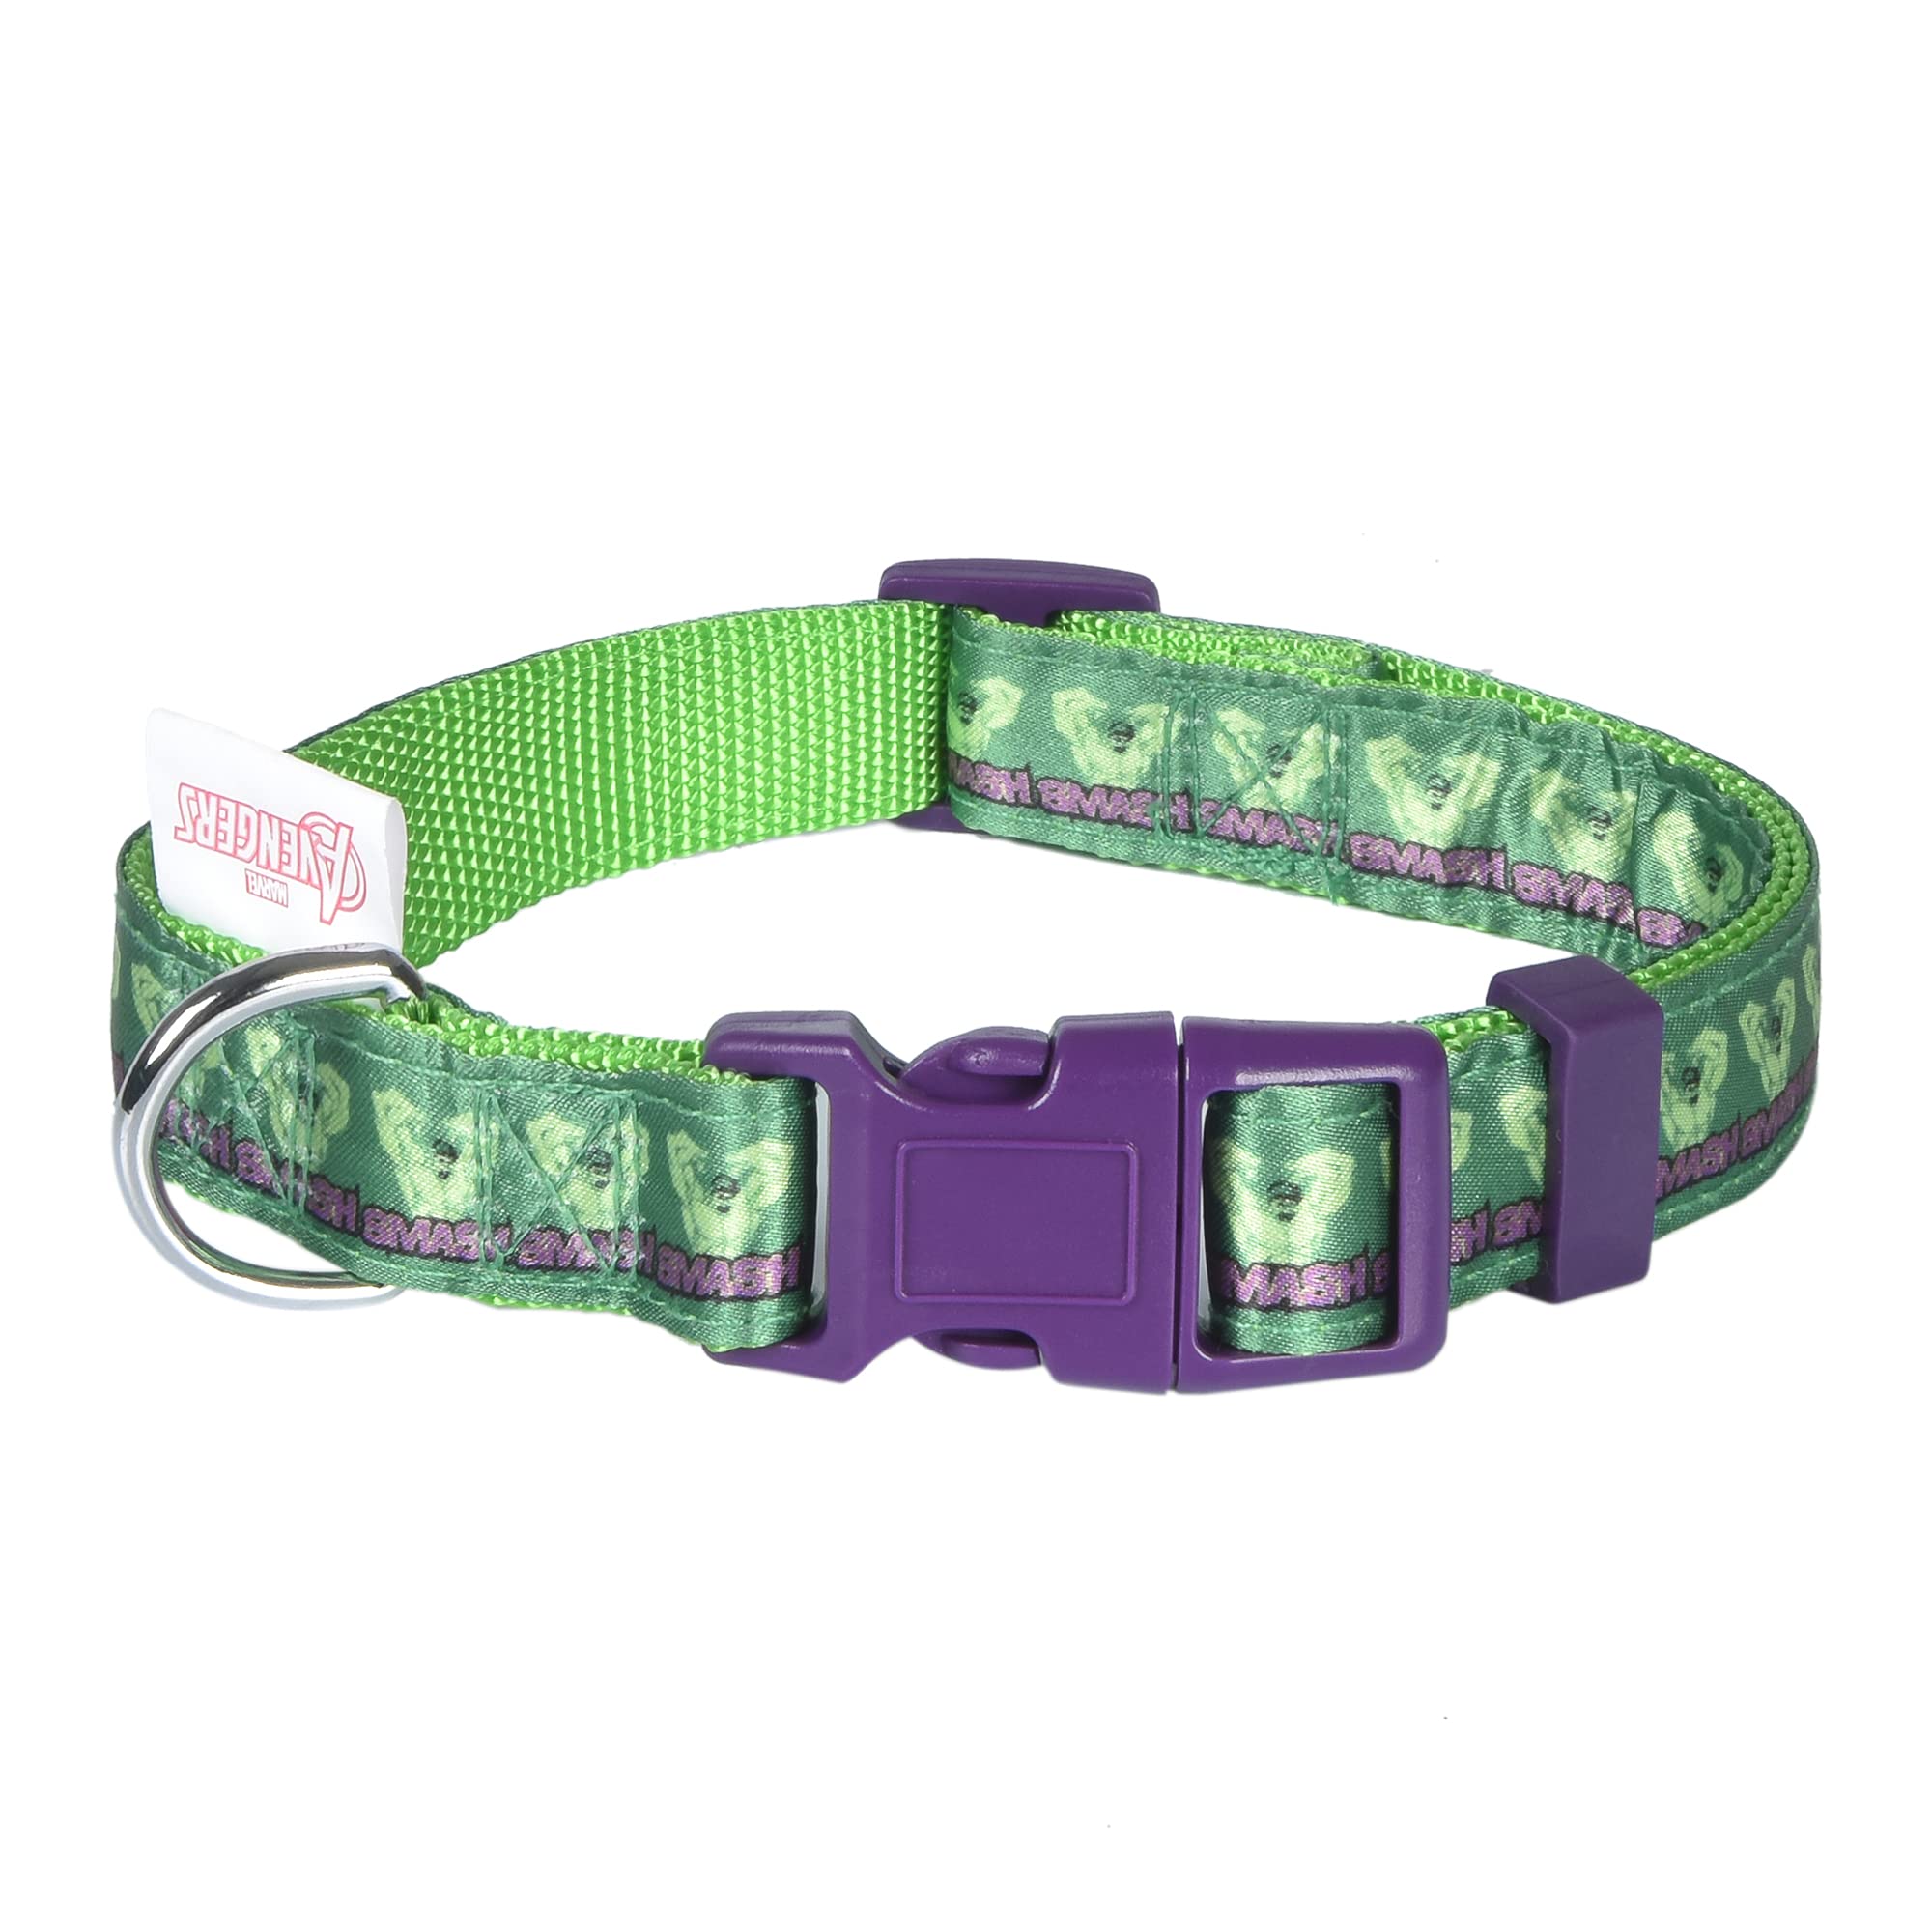 Marvel Comics The Hulk: Dog Collar (Green & Purple, Sizes: S, M, L) From $3.50, Dog Leash 4' $3.51, 6' $6.09 + Free Shipping w/ Prime or on $25+